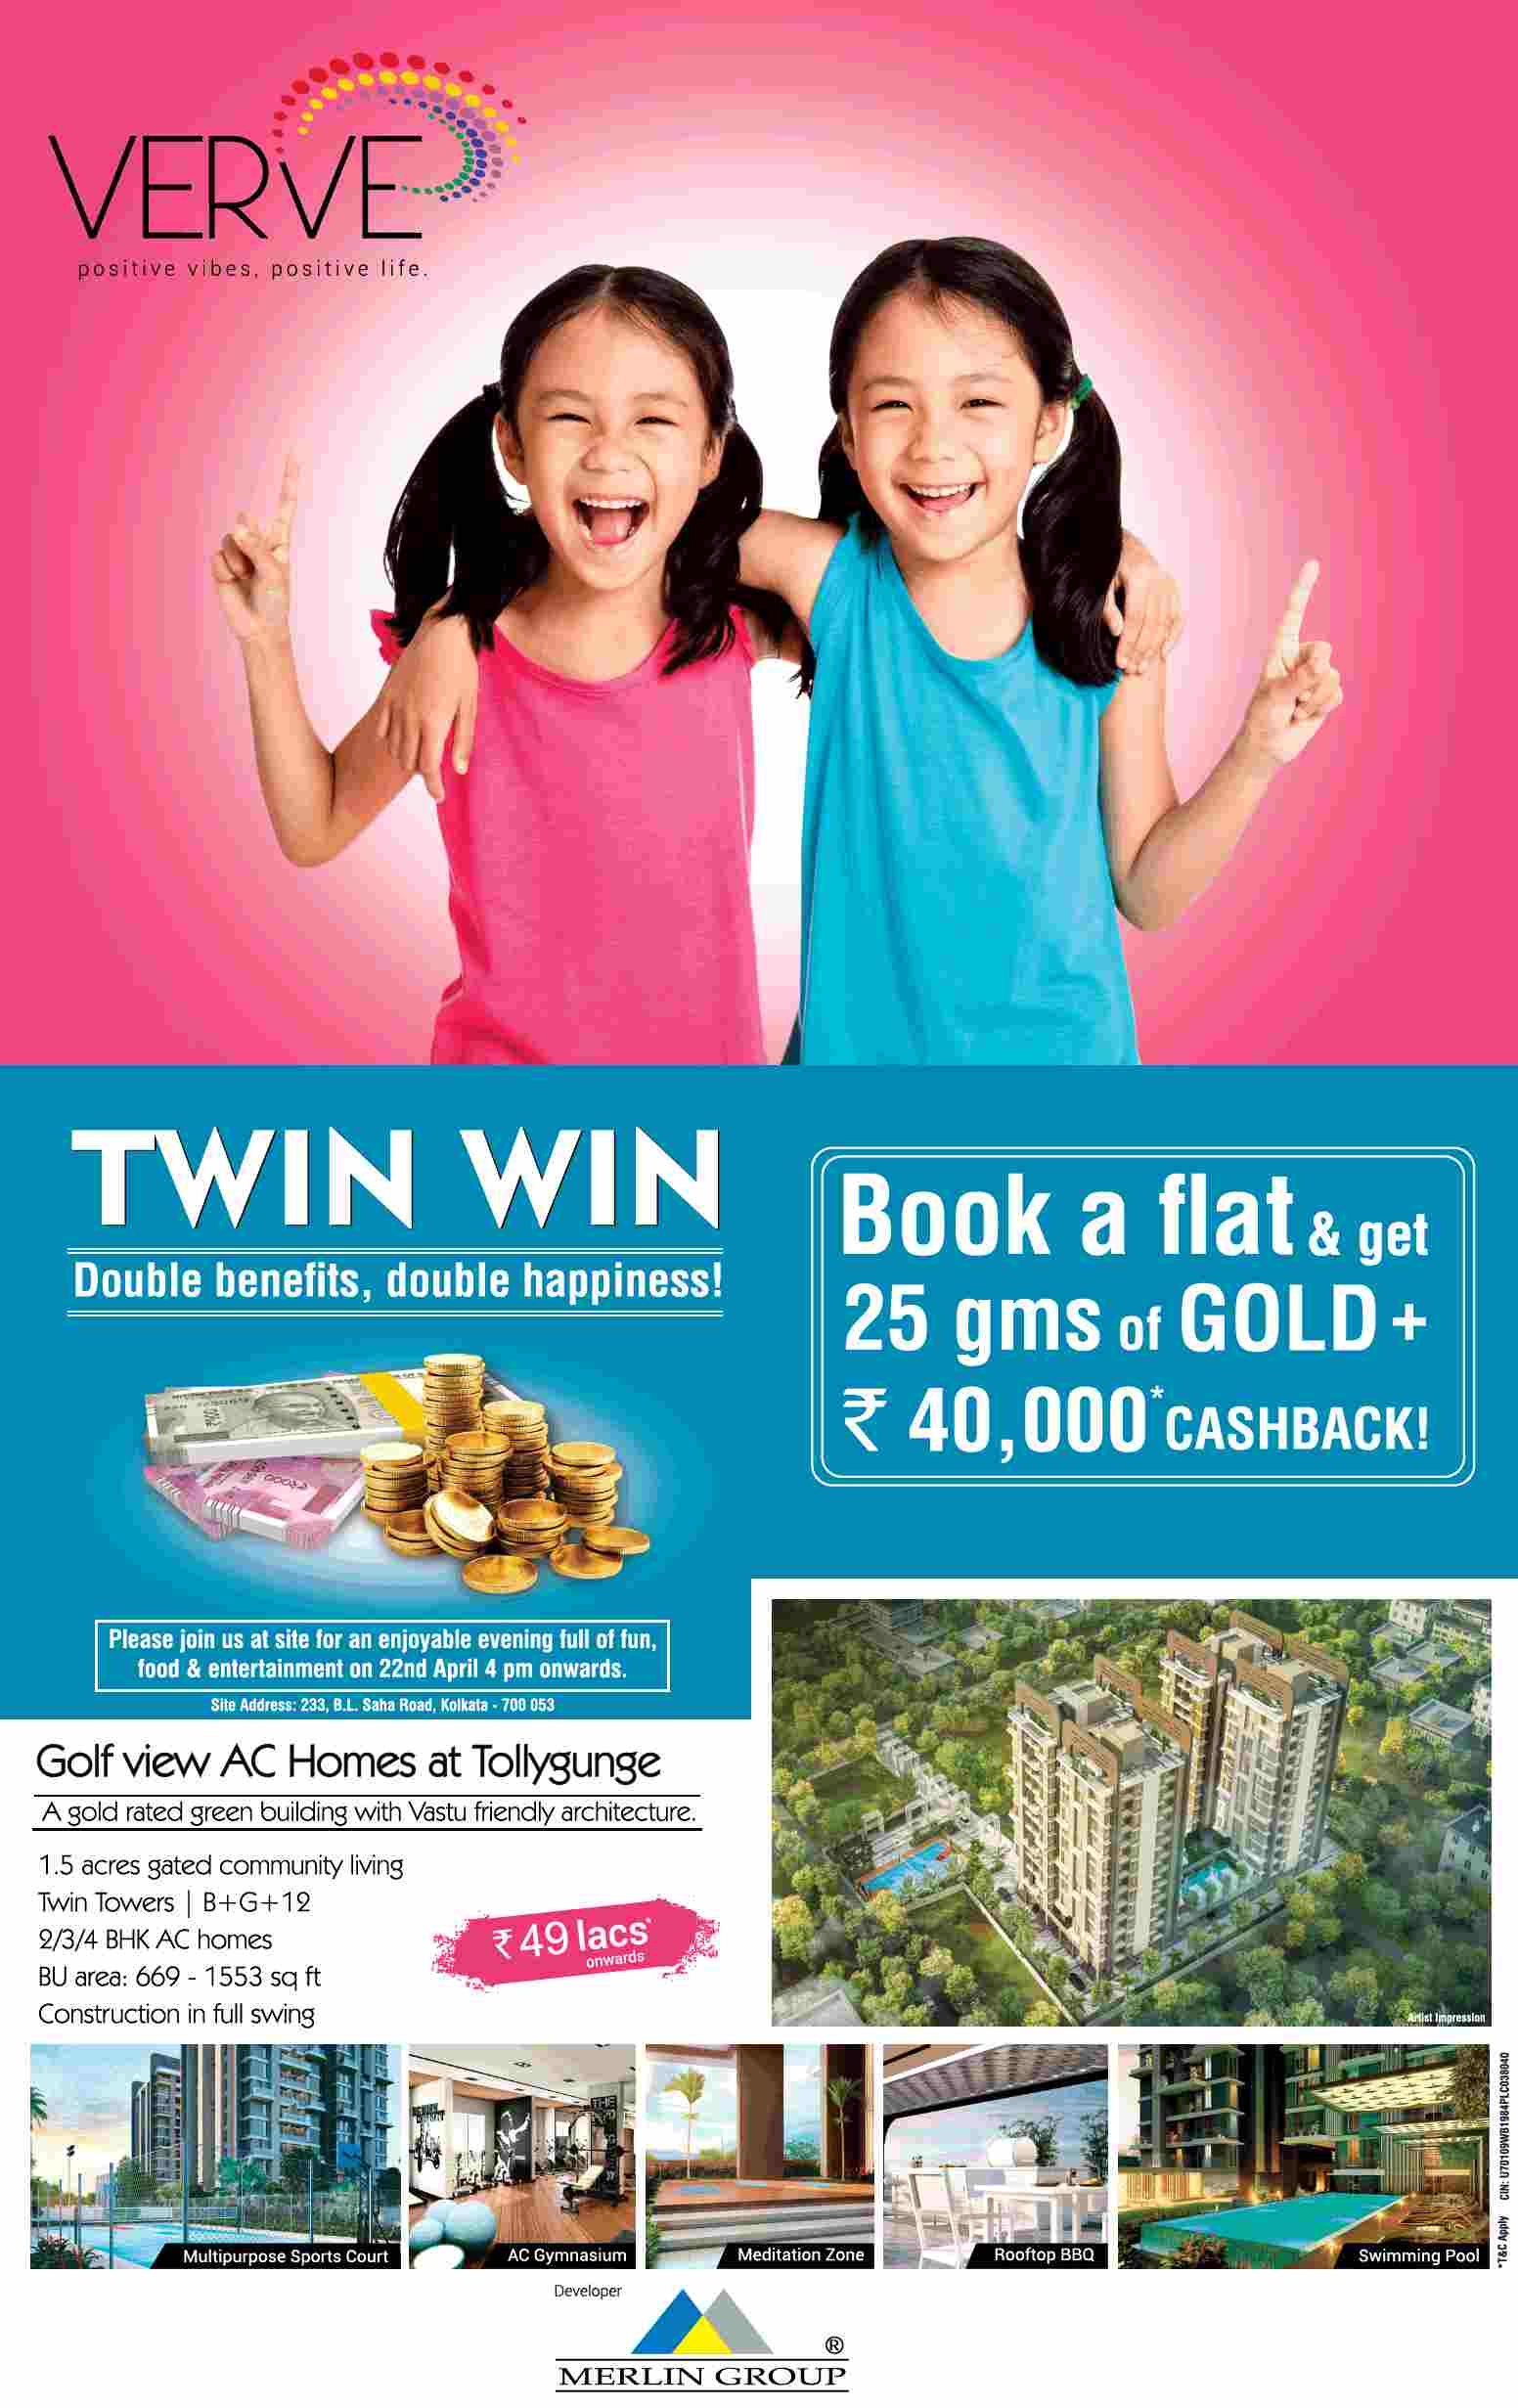 Book a flat and get 25 gms of gold plus Rs. 40,000 cashback at Merlin Verve in Kolkata